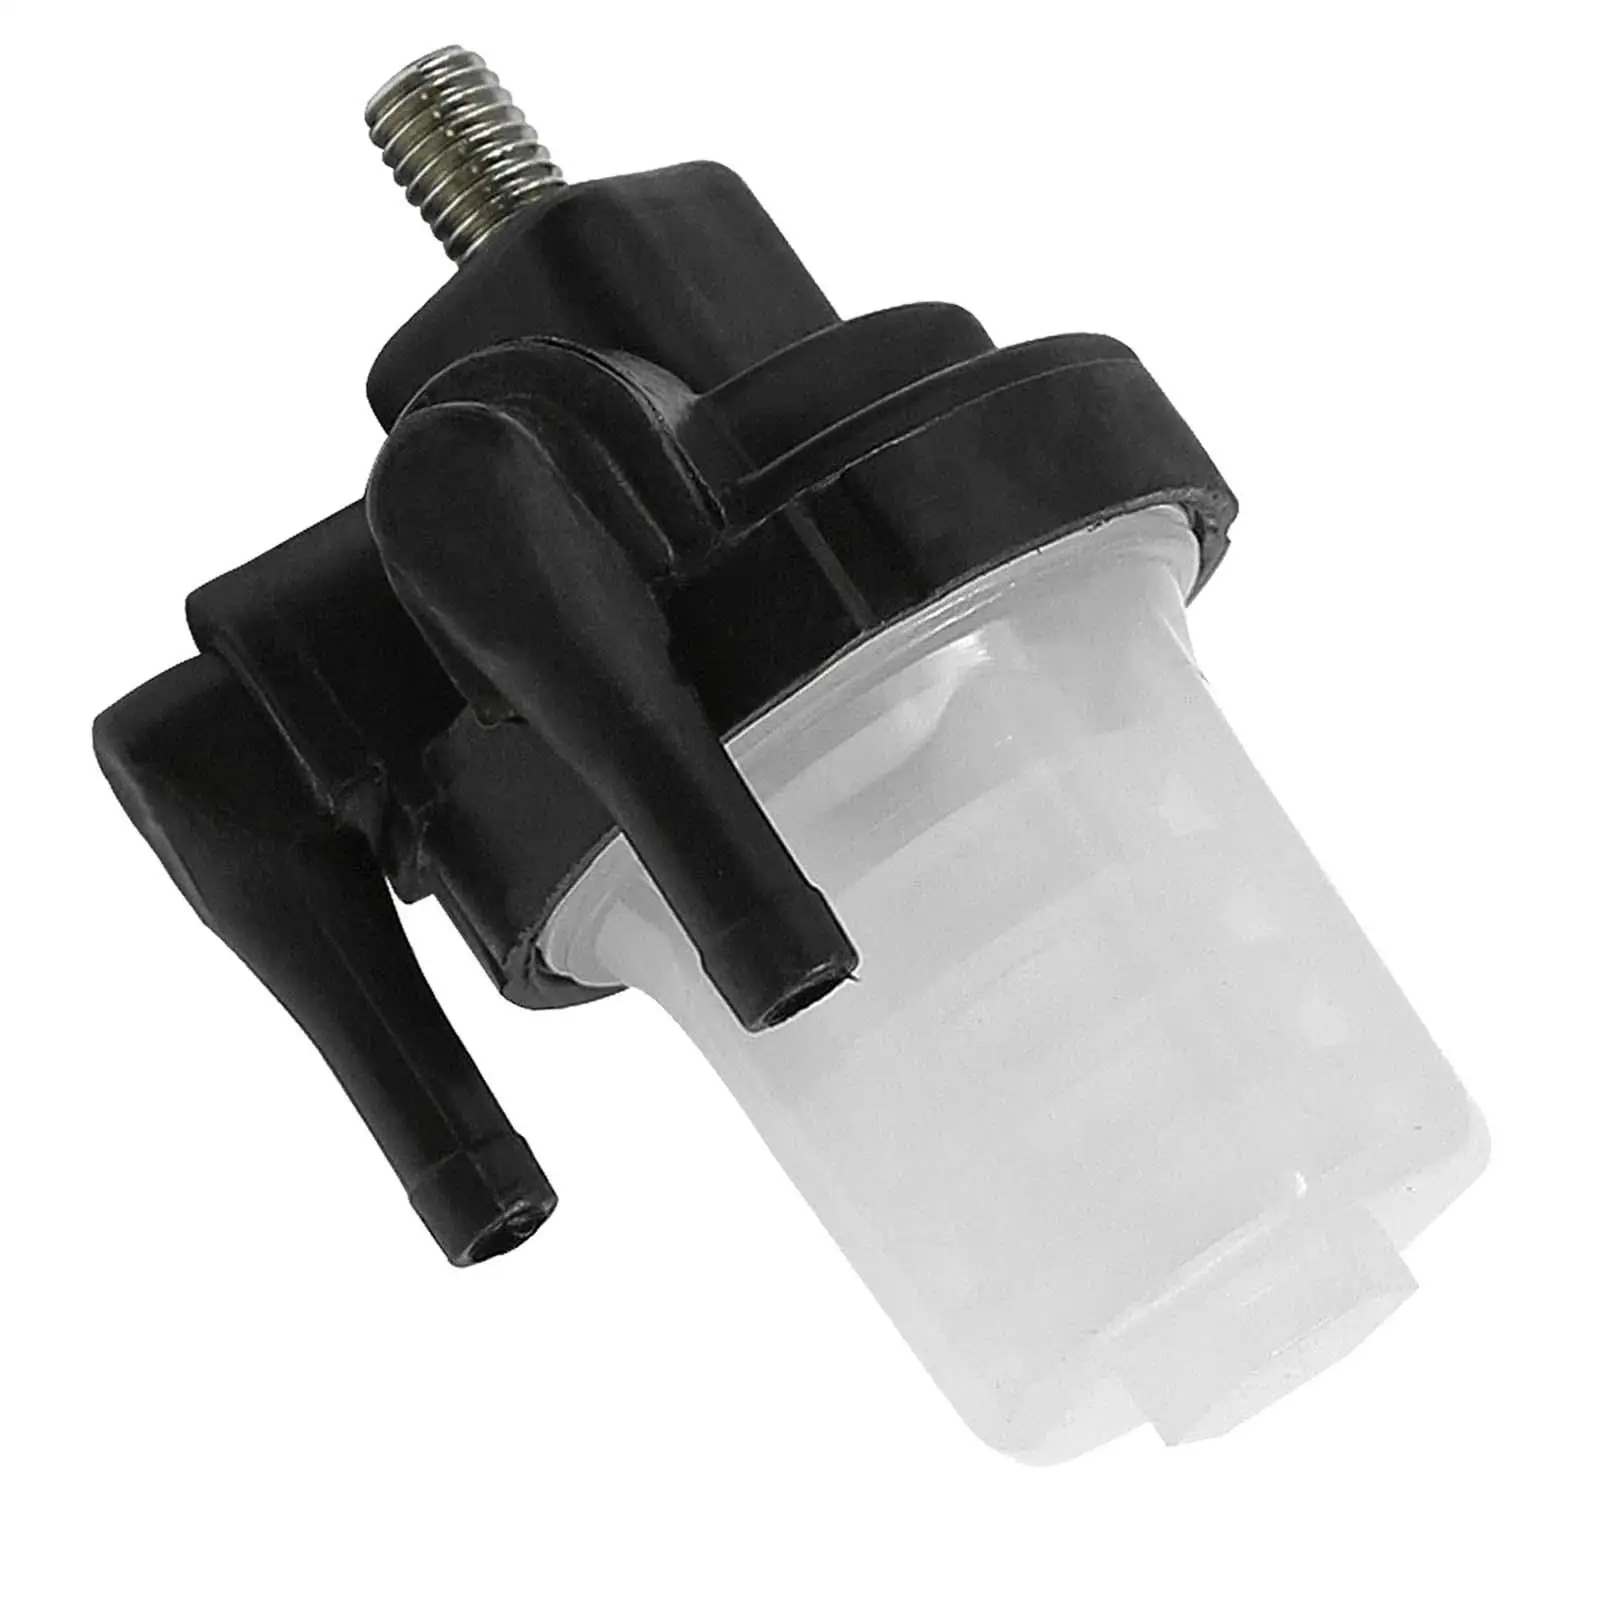 for 61N-24560-00-00 Fuel Filter Fittings Marine Parts Replacement Boat Fuel Filter Assembly for Outboard Motor for 18-79910